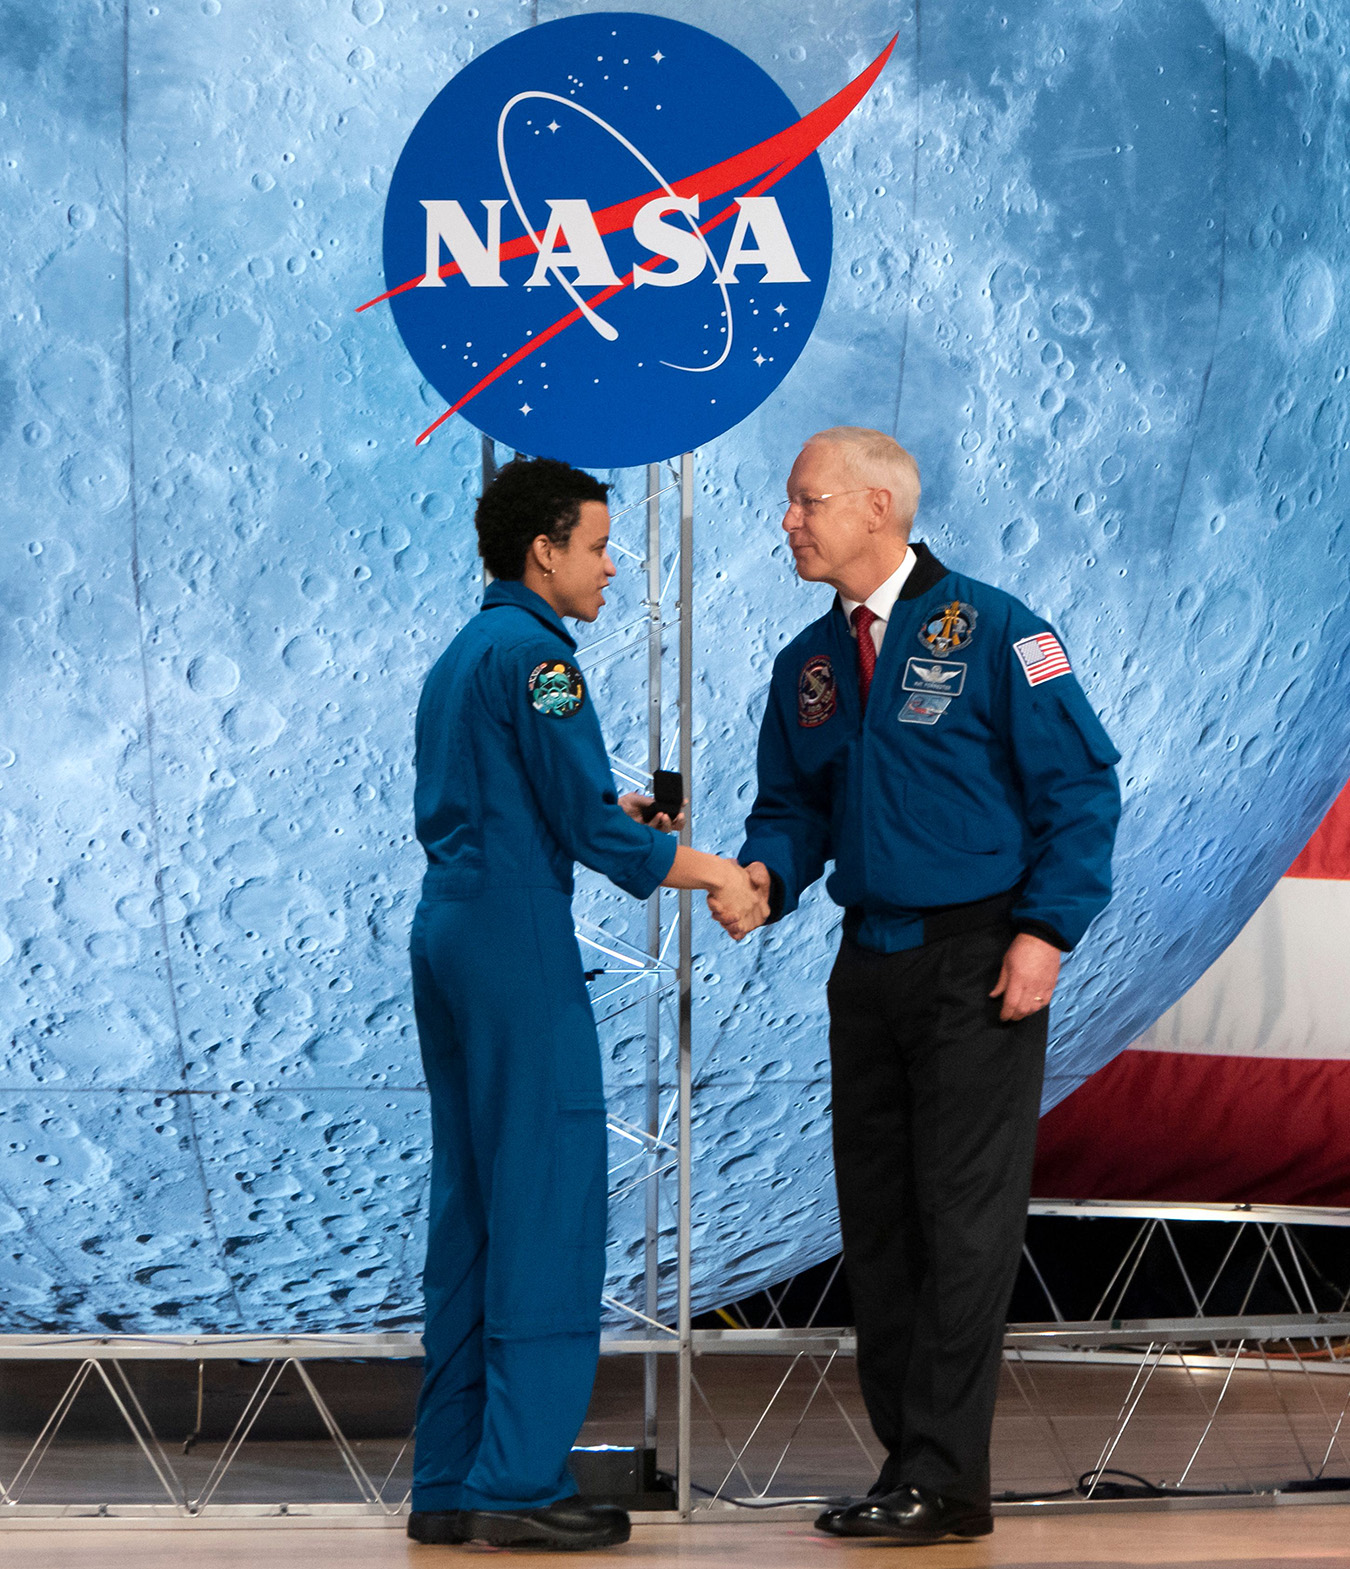 NASA astronaut Jessica Watkins shakes hands with former astronaut Patrick G. Forrester during the astronaut graduation ceremony at Johnson Space Center in Houston Texas, on January 10, 2020. 